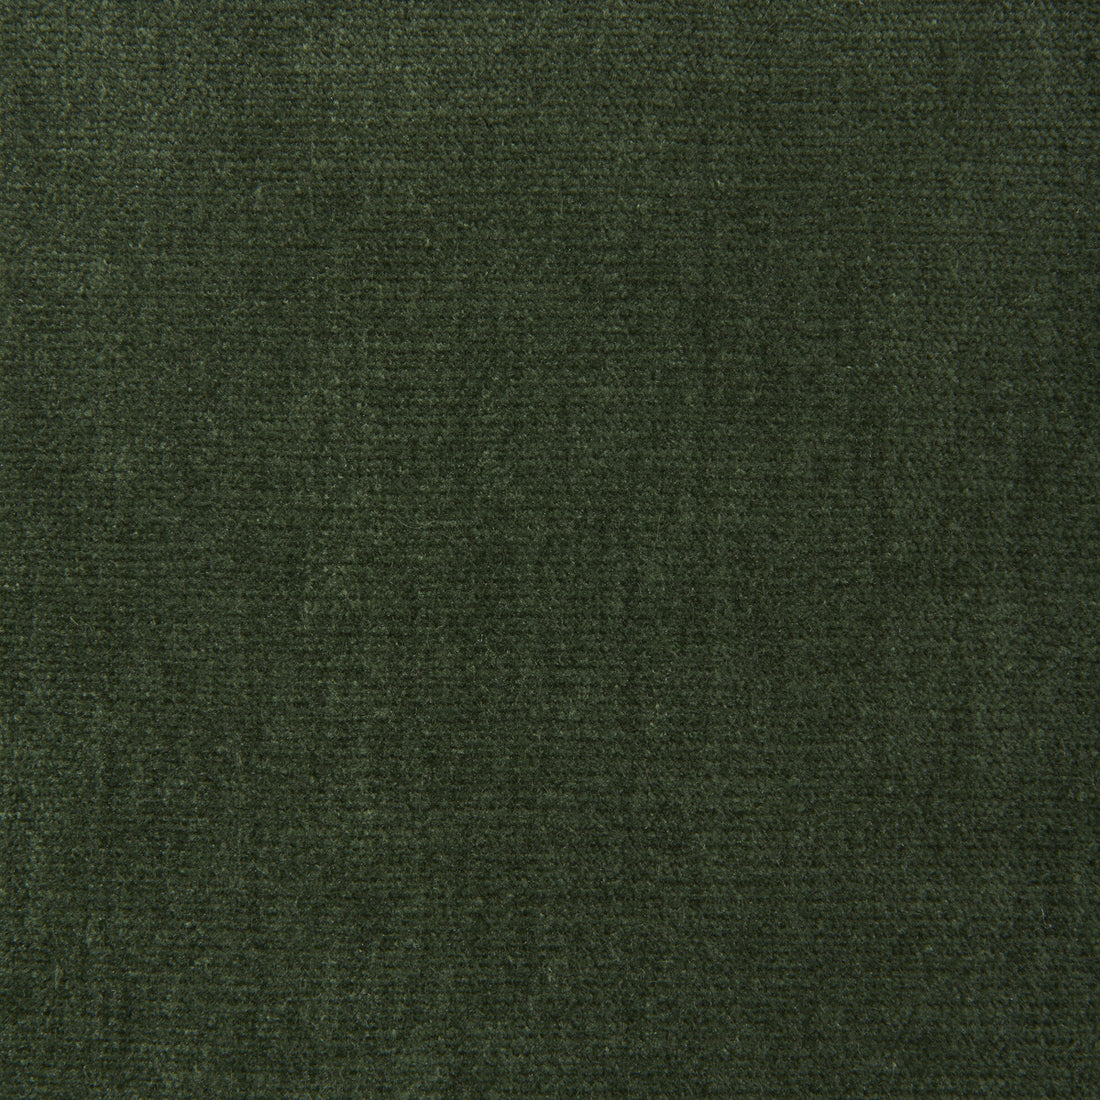 Kravet Smart fabric in 36076-33 color - pattern 36076.33.0 - by Kravet Smart in the Sumptuous Chenille II collection